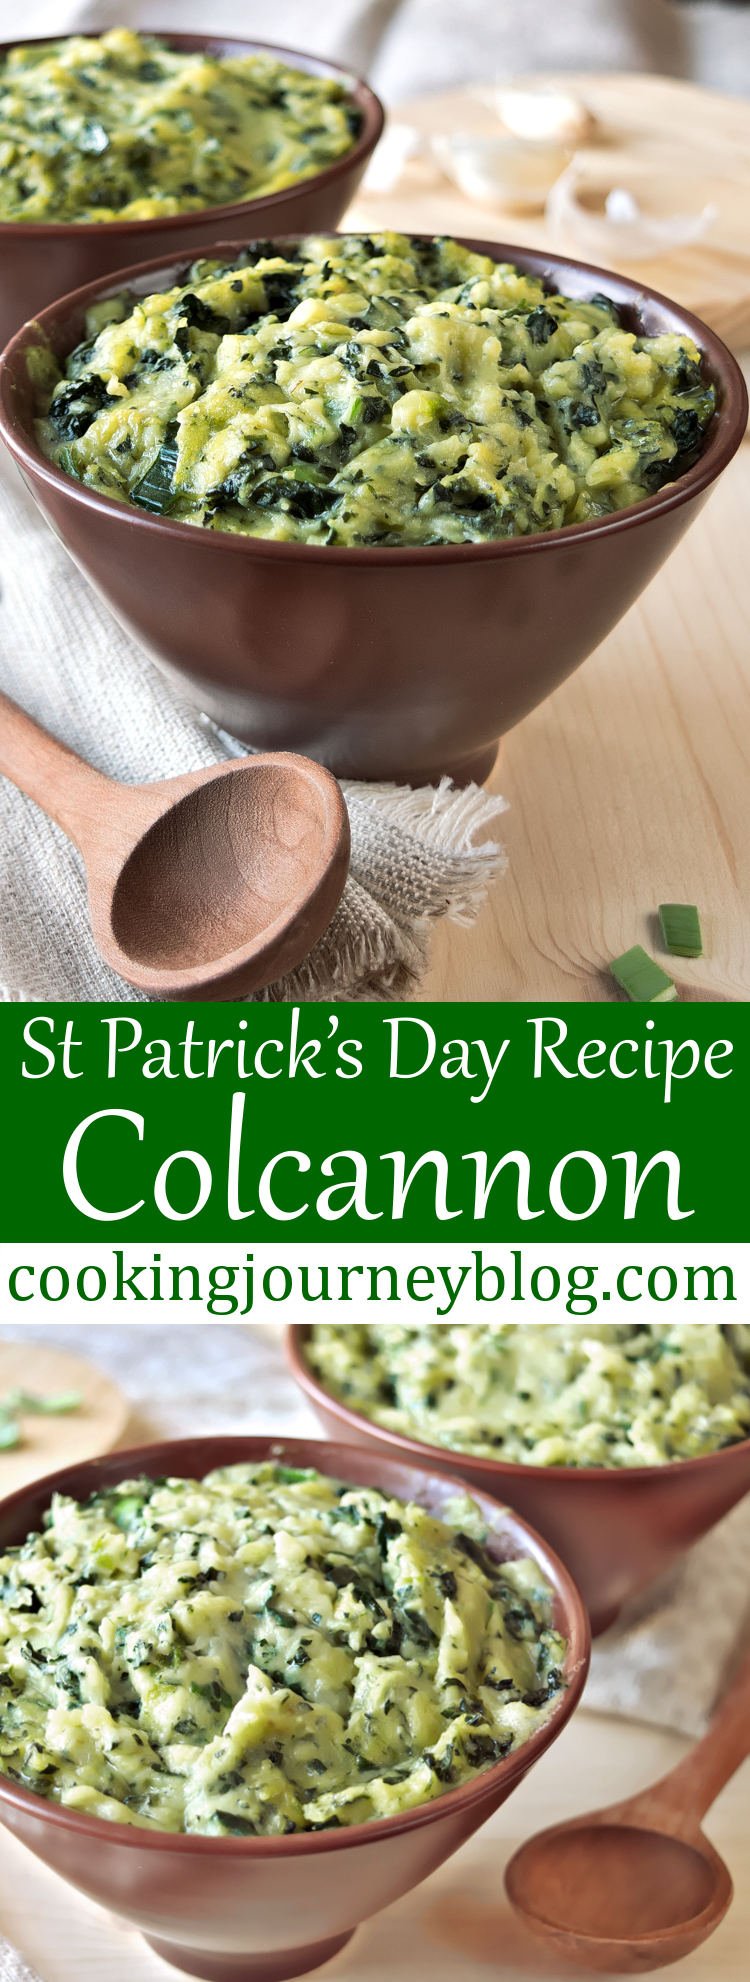 Colcannon is one of easy Irish recipes I wanted to try for a long time. It turned out best mashed potatoes I ever had! Simple mashed potatoes with sauteed kale and garlic, great and filling side dish. Moreover, colcannon is ultimate St Patrick’s day food!